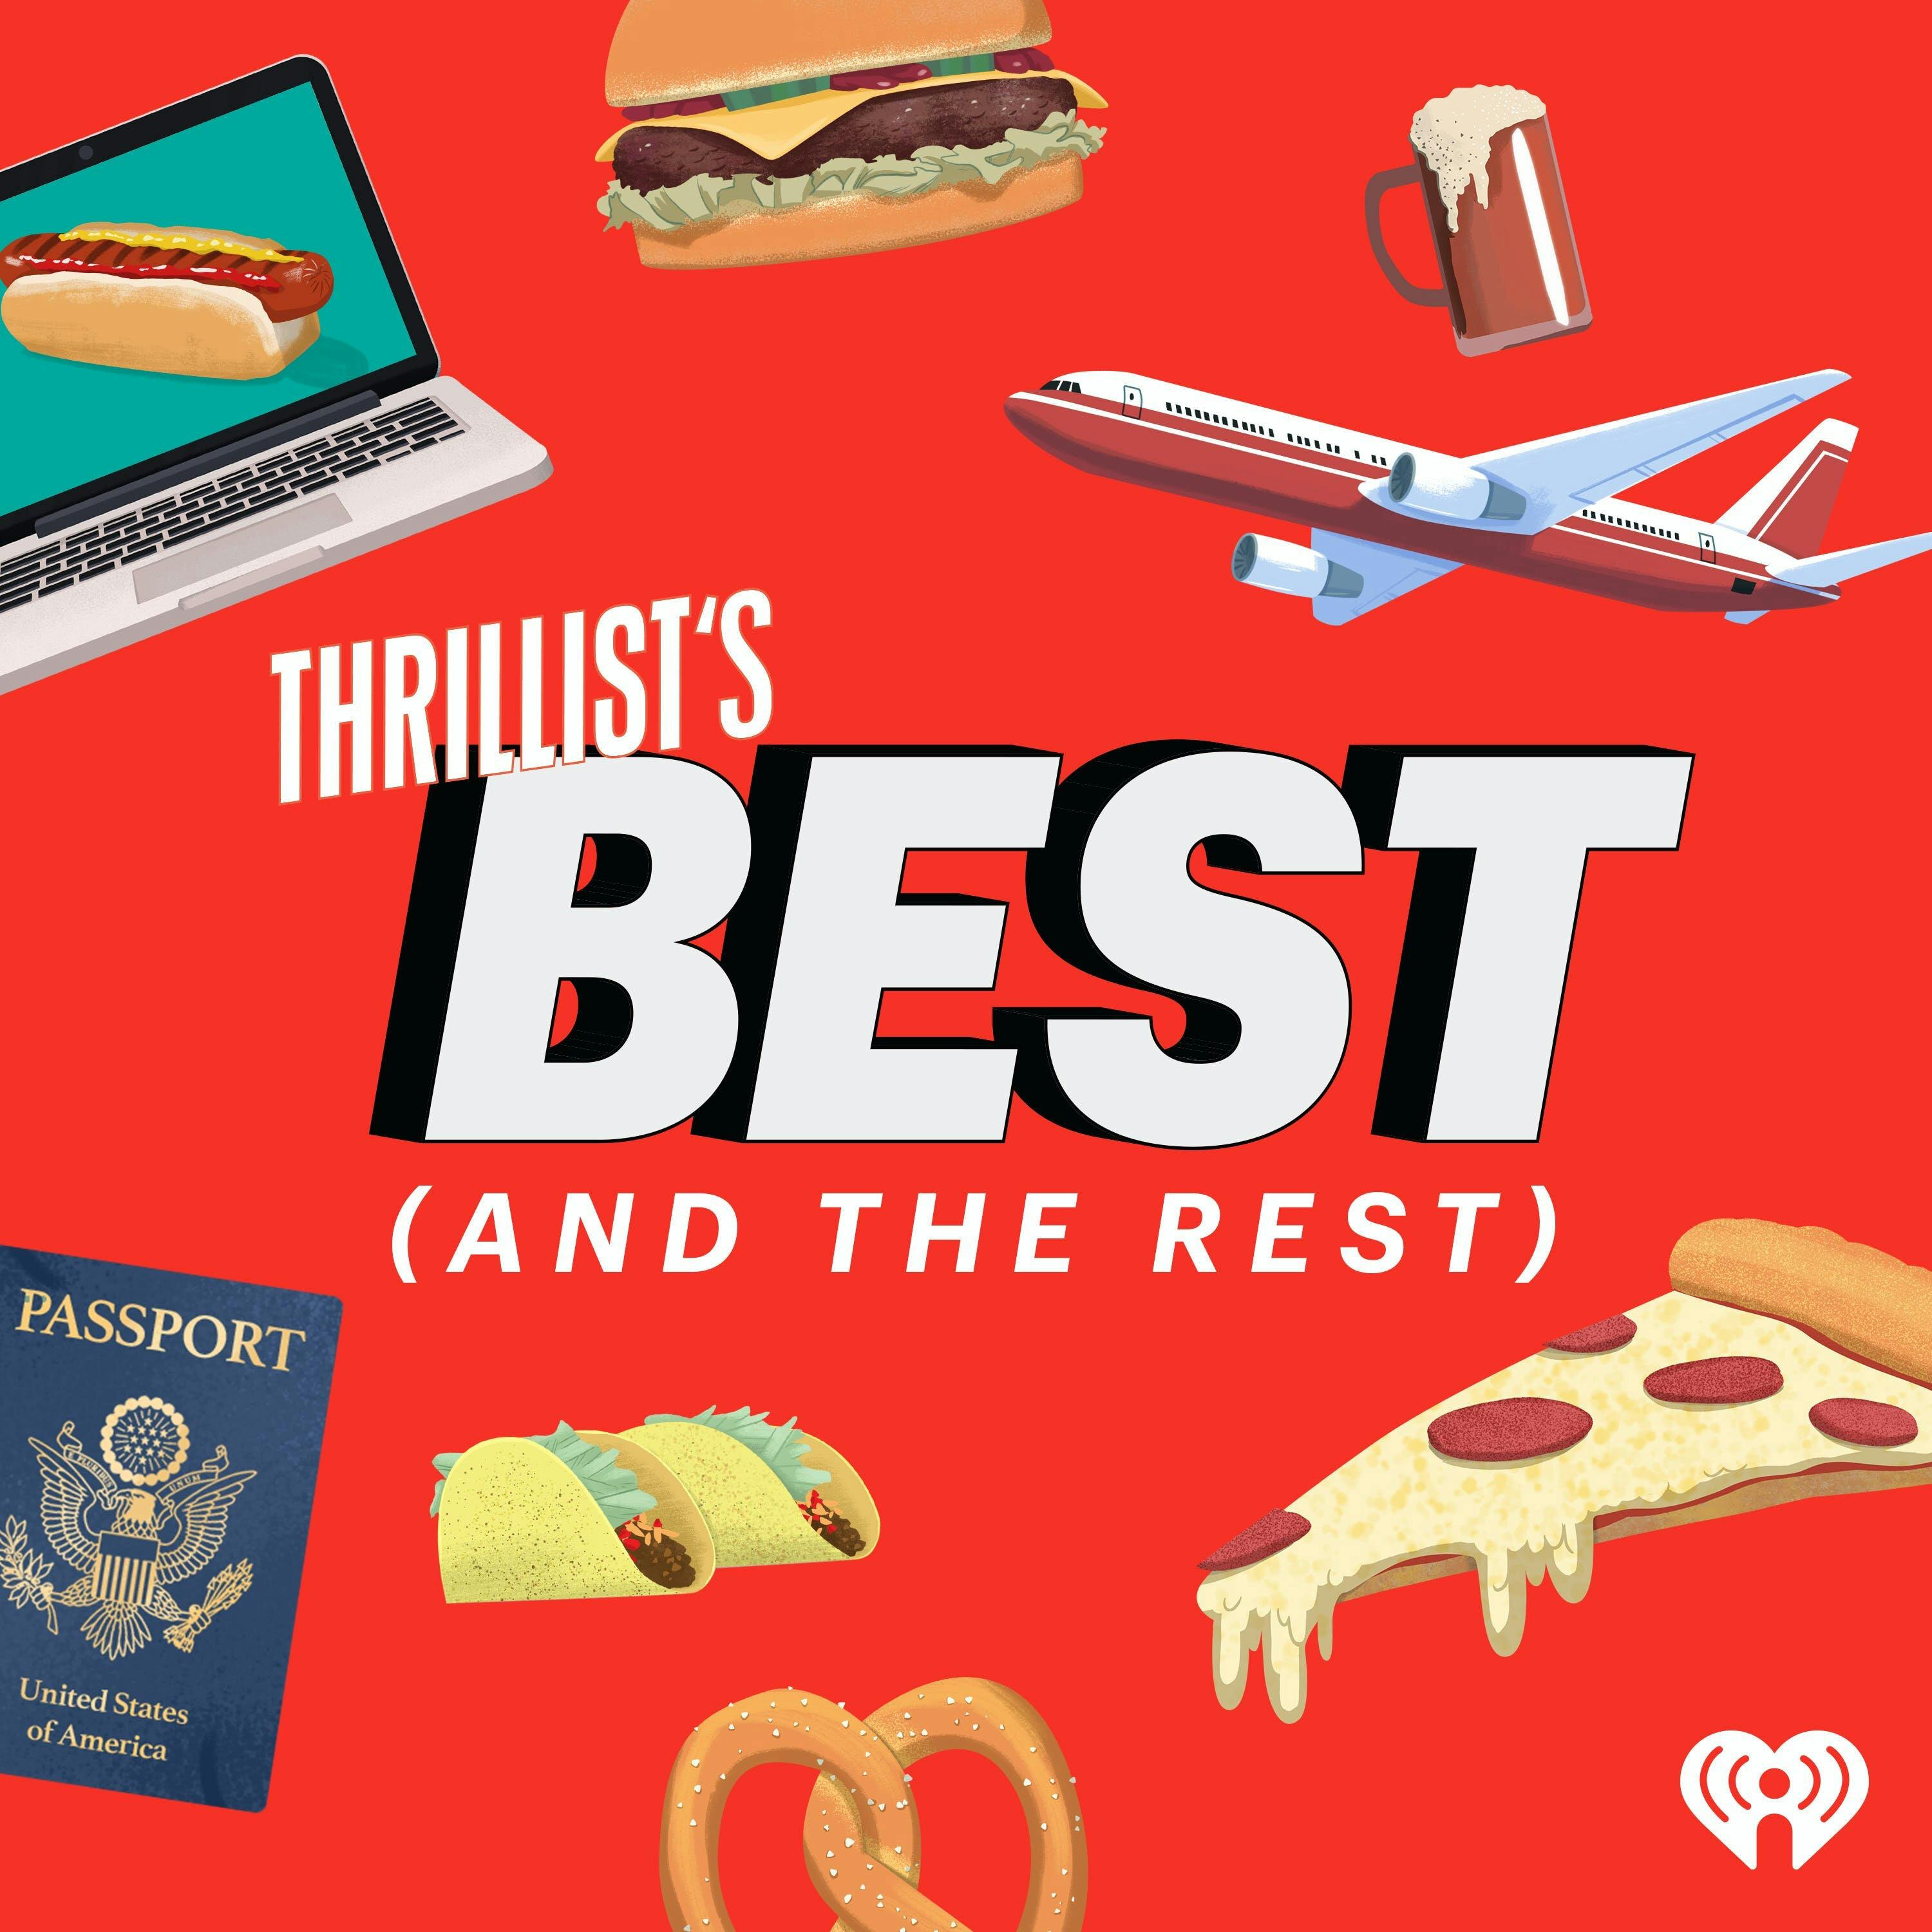 THRILLIST’S BEST: How Covid-19 Will Change the Way We Travel